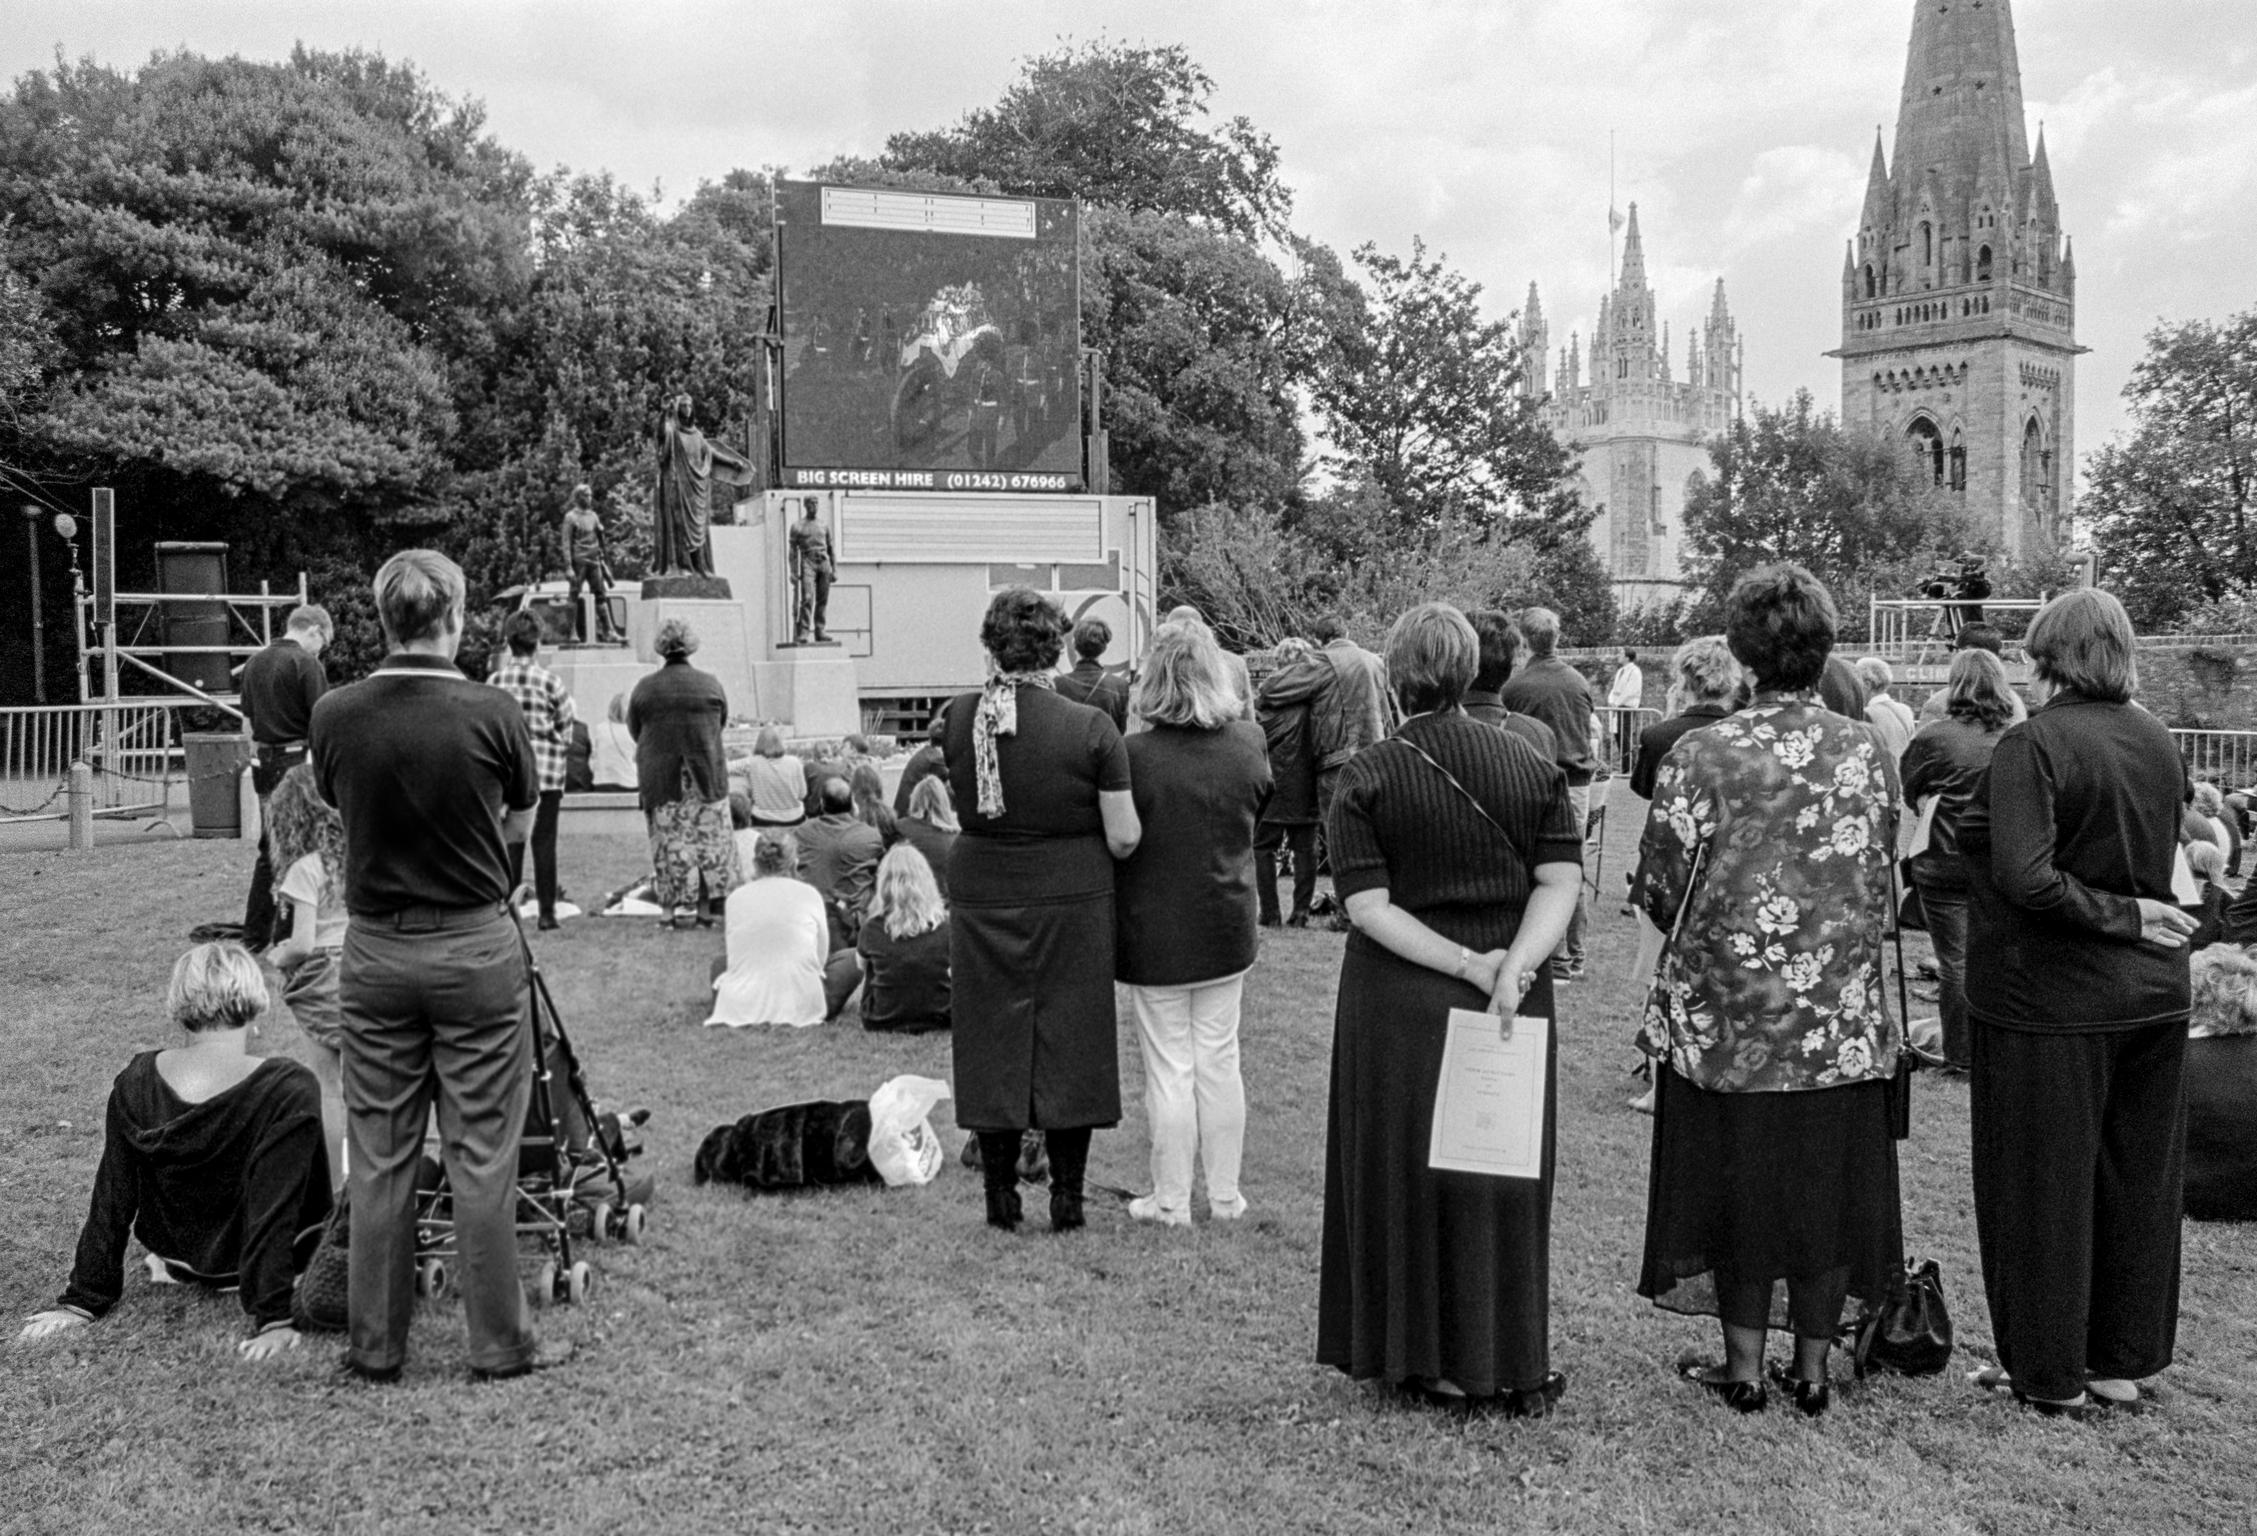 Funeral service of Lady Diana Princess of Wales. Relayed to mourners in Llandaff. Wales